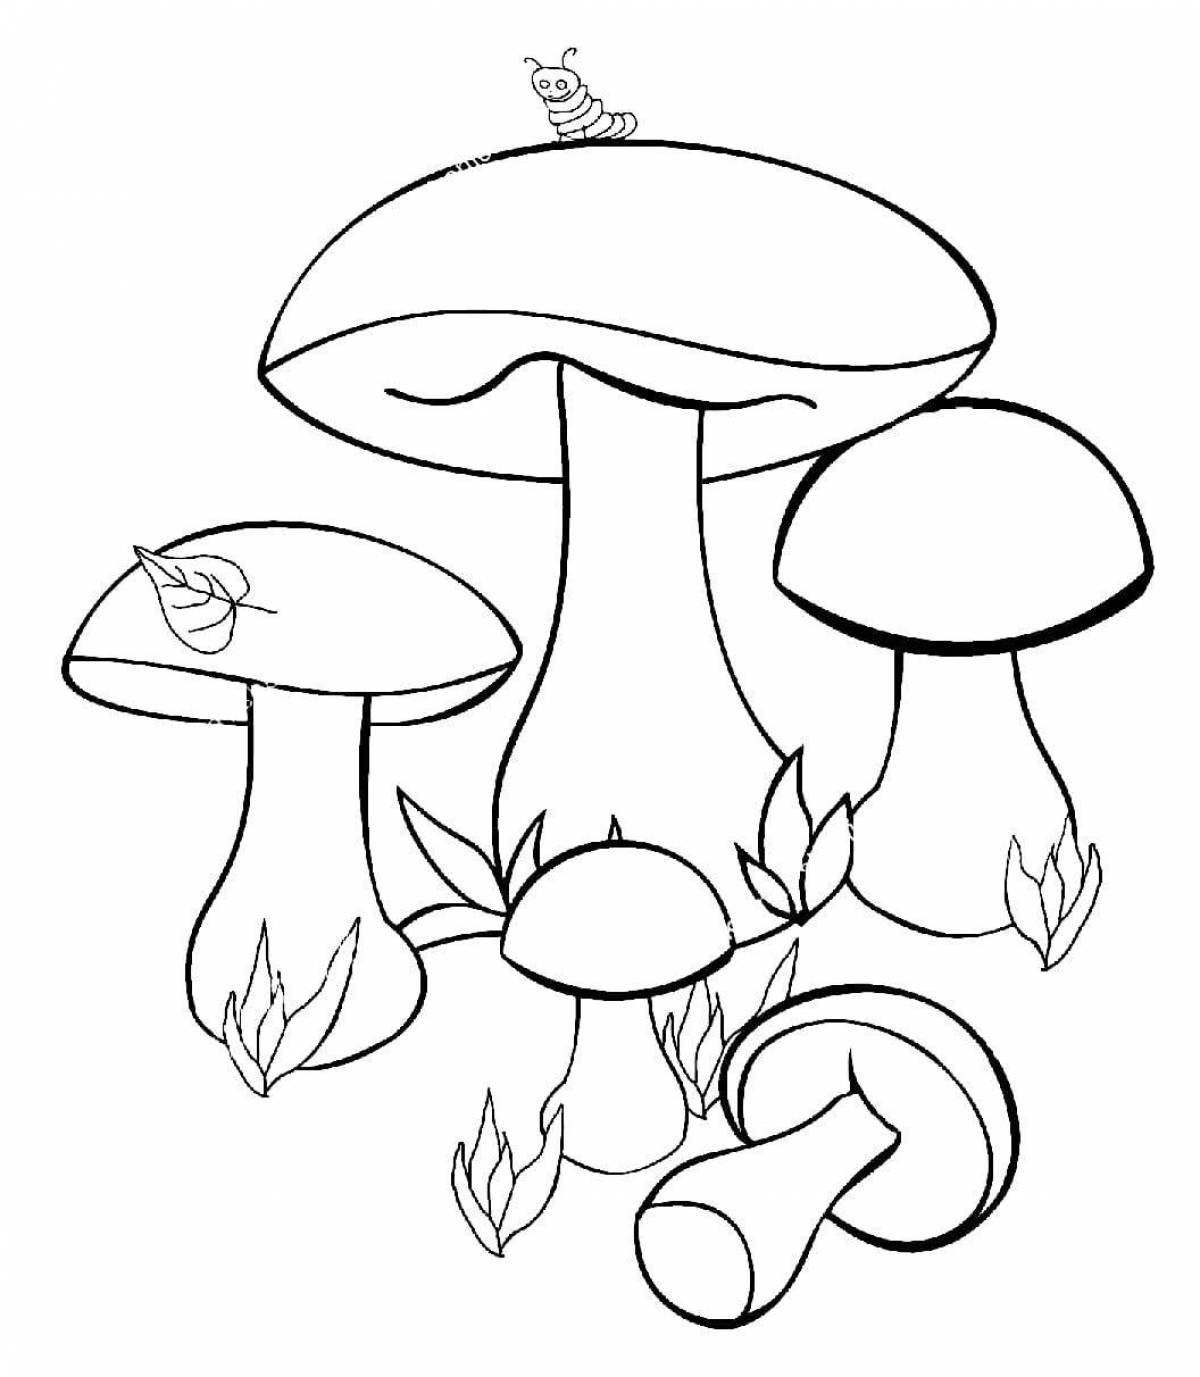 Bright mushroom coloring pages for 3-4 year olds